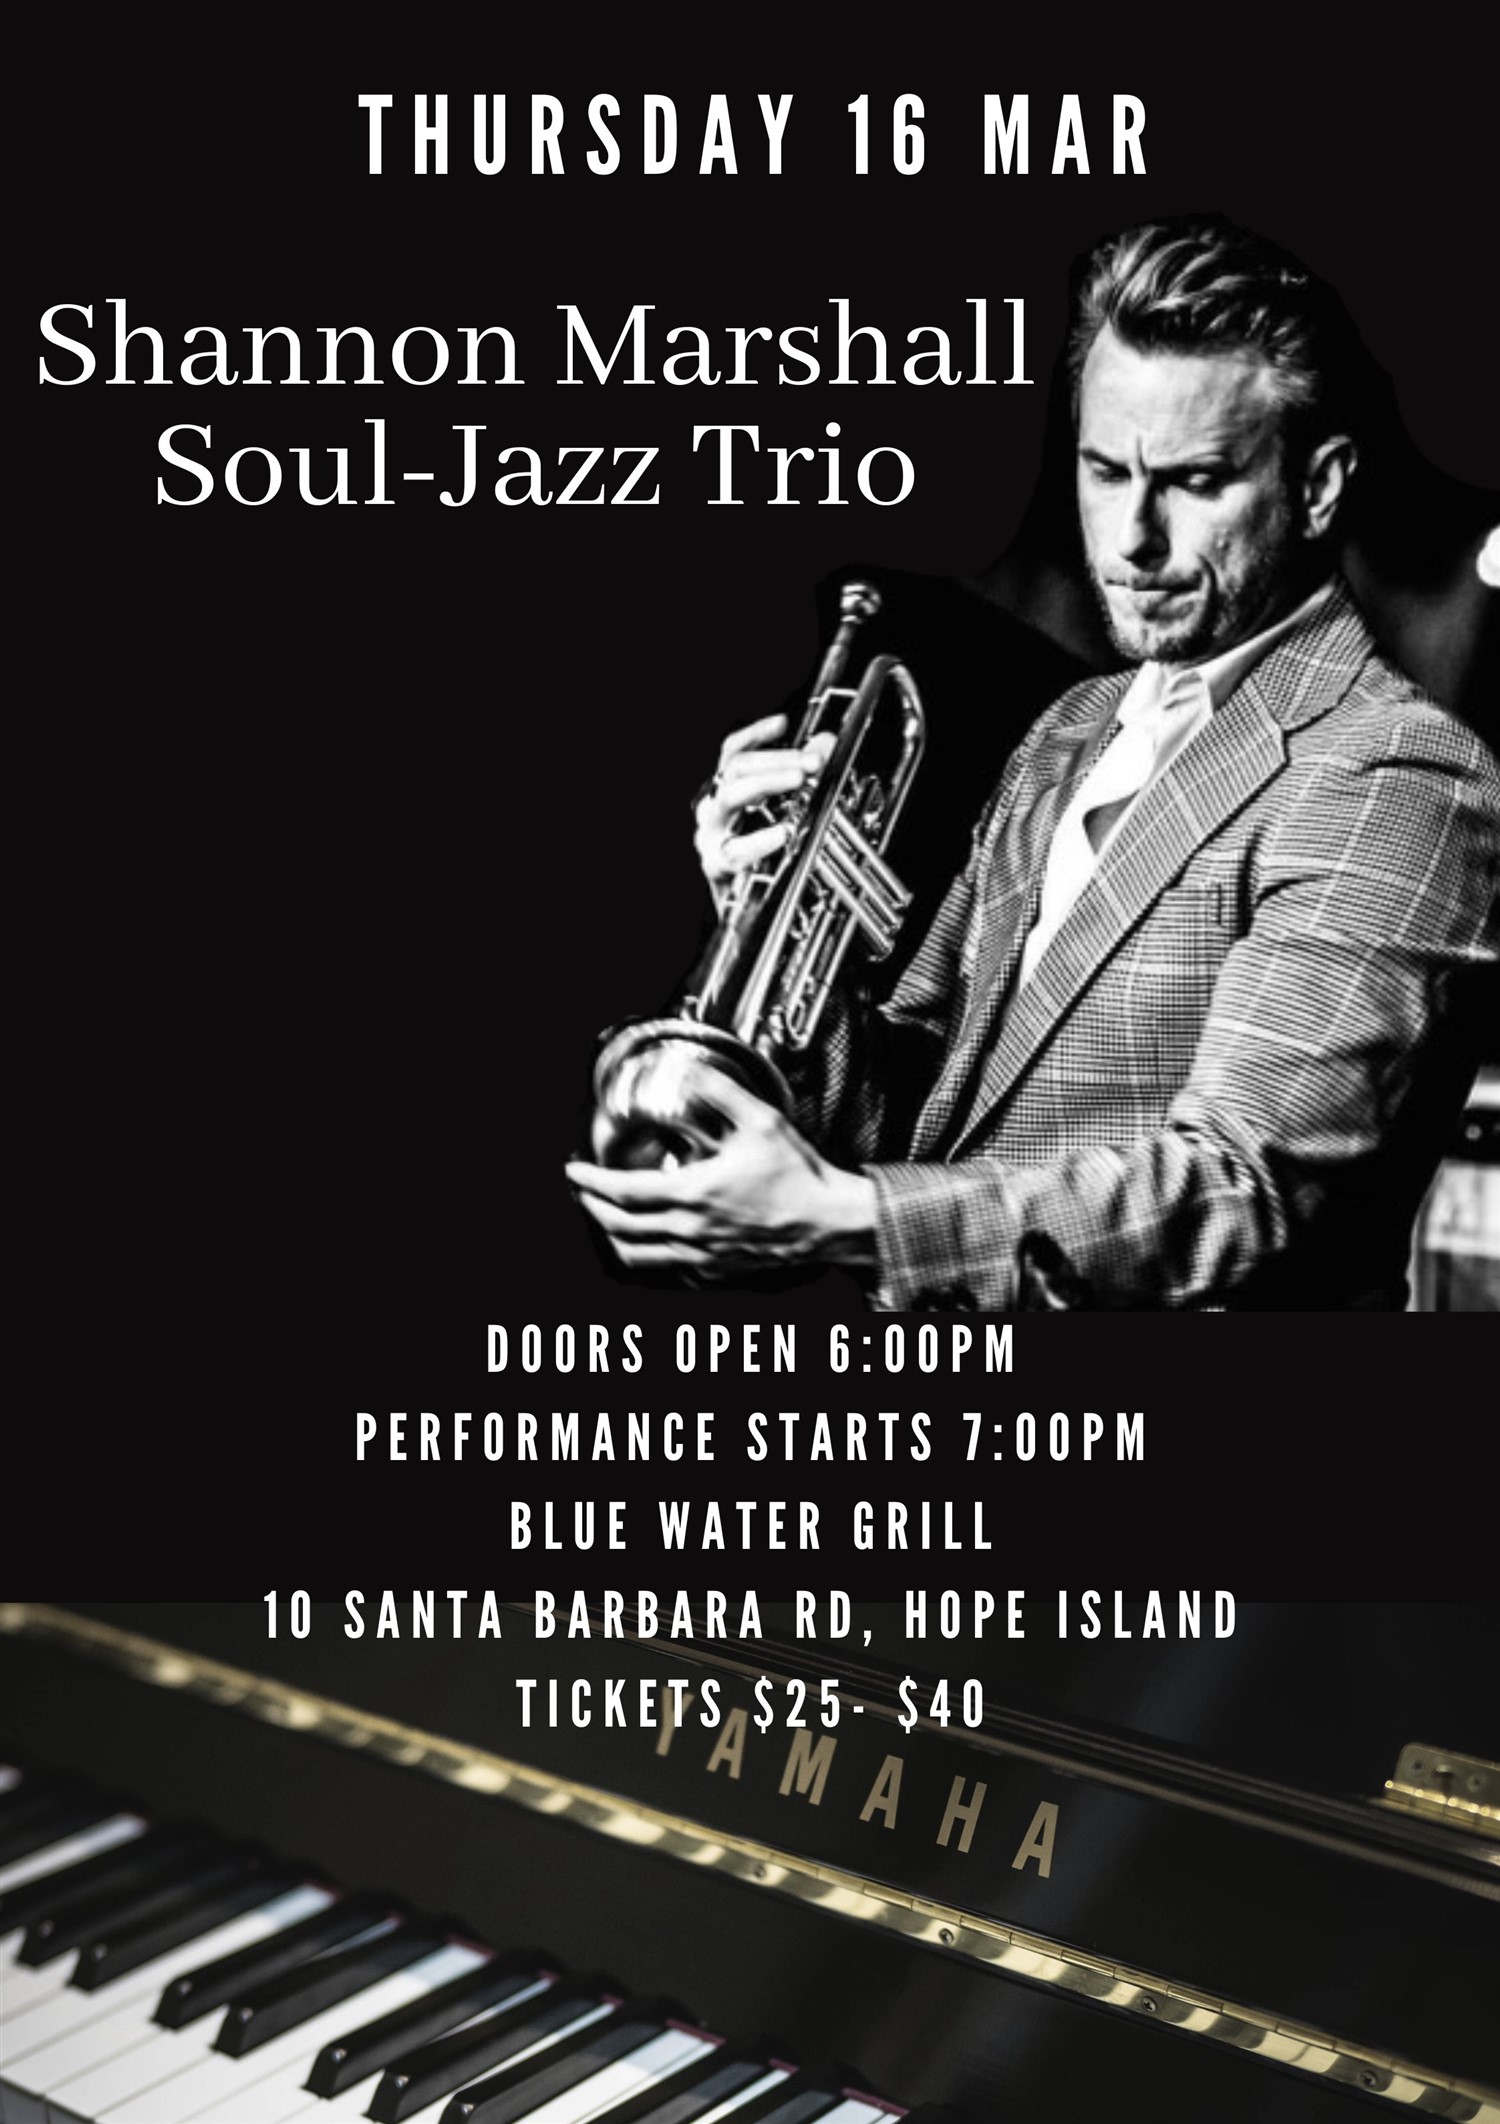 The Shannon Marshall Soul-Jazz Trio  on Mar 16, 18:00@Hope Island Jazz - Blue Water Grill - Buy tickets and Get information on Hope Island Jazz hopeislandjazz.com.au